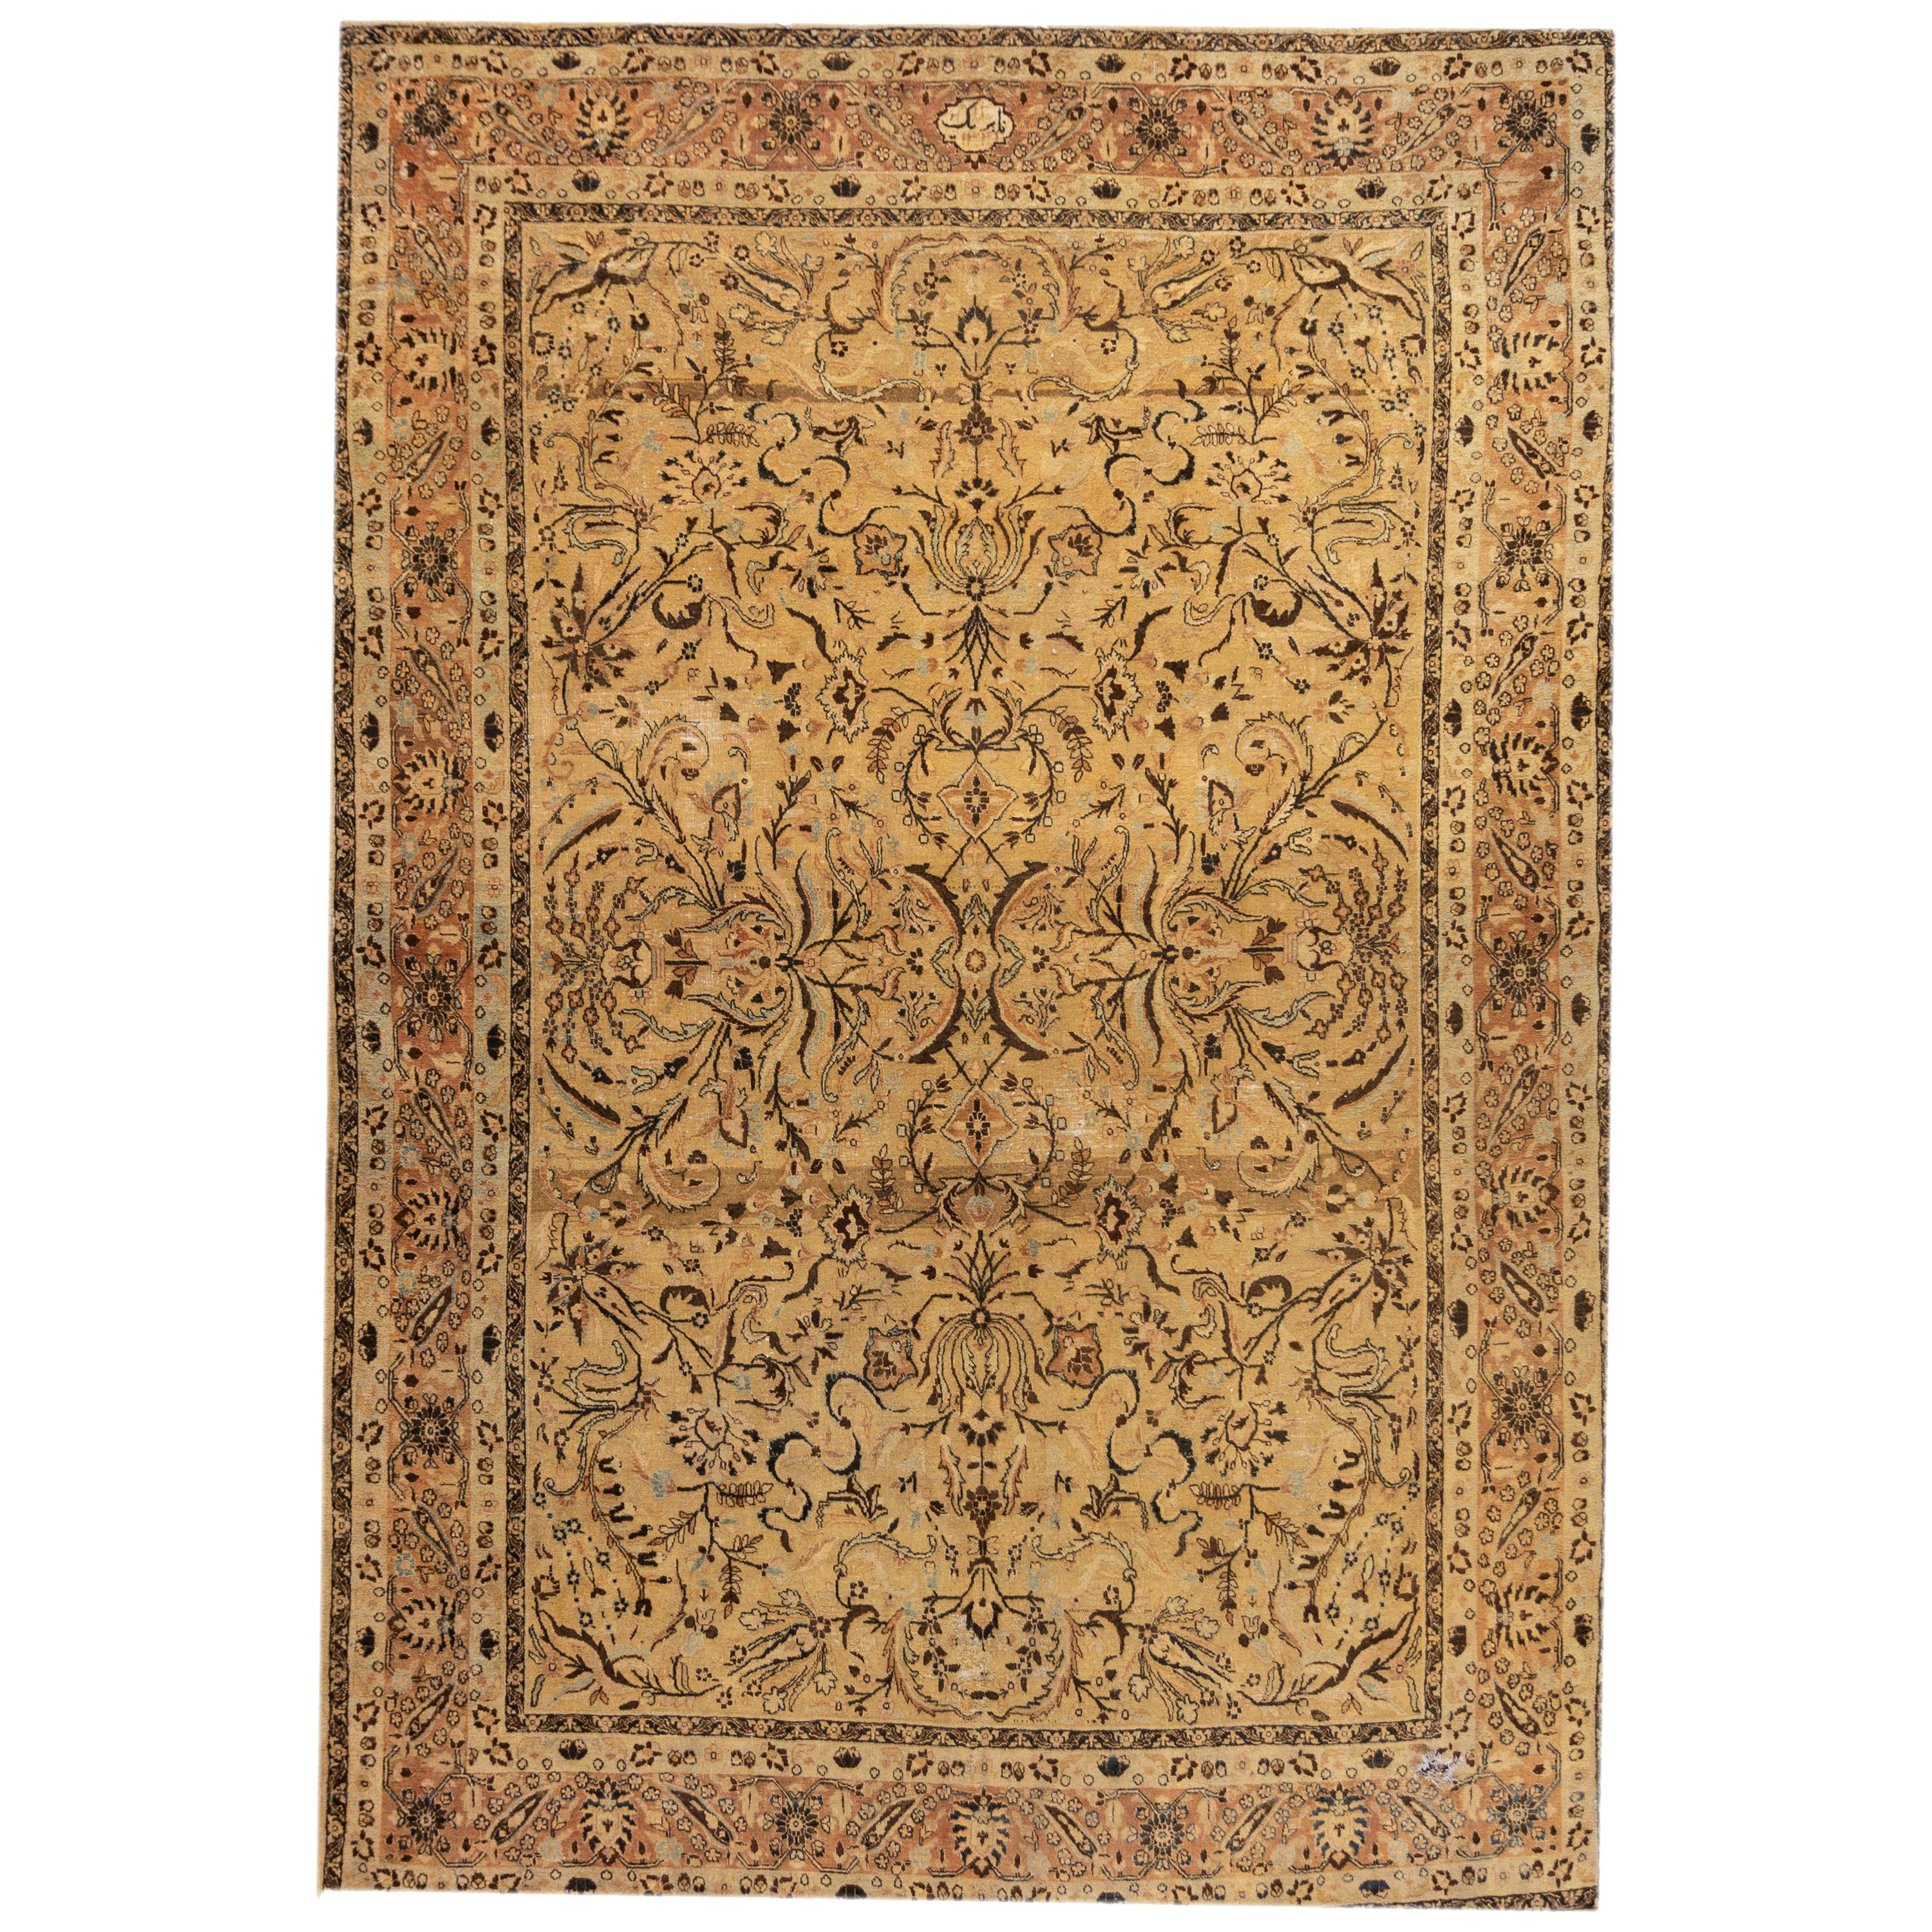 An early 20th century antique Tabriz rug with an all over beige and brown motif. This rug measures 10'4